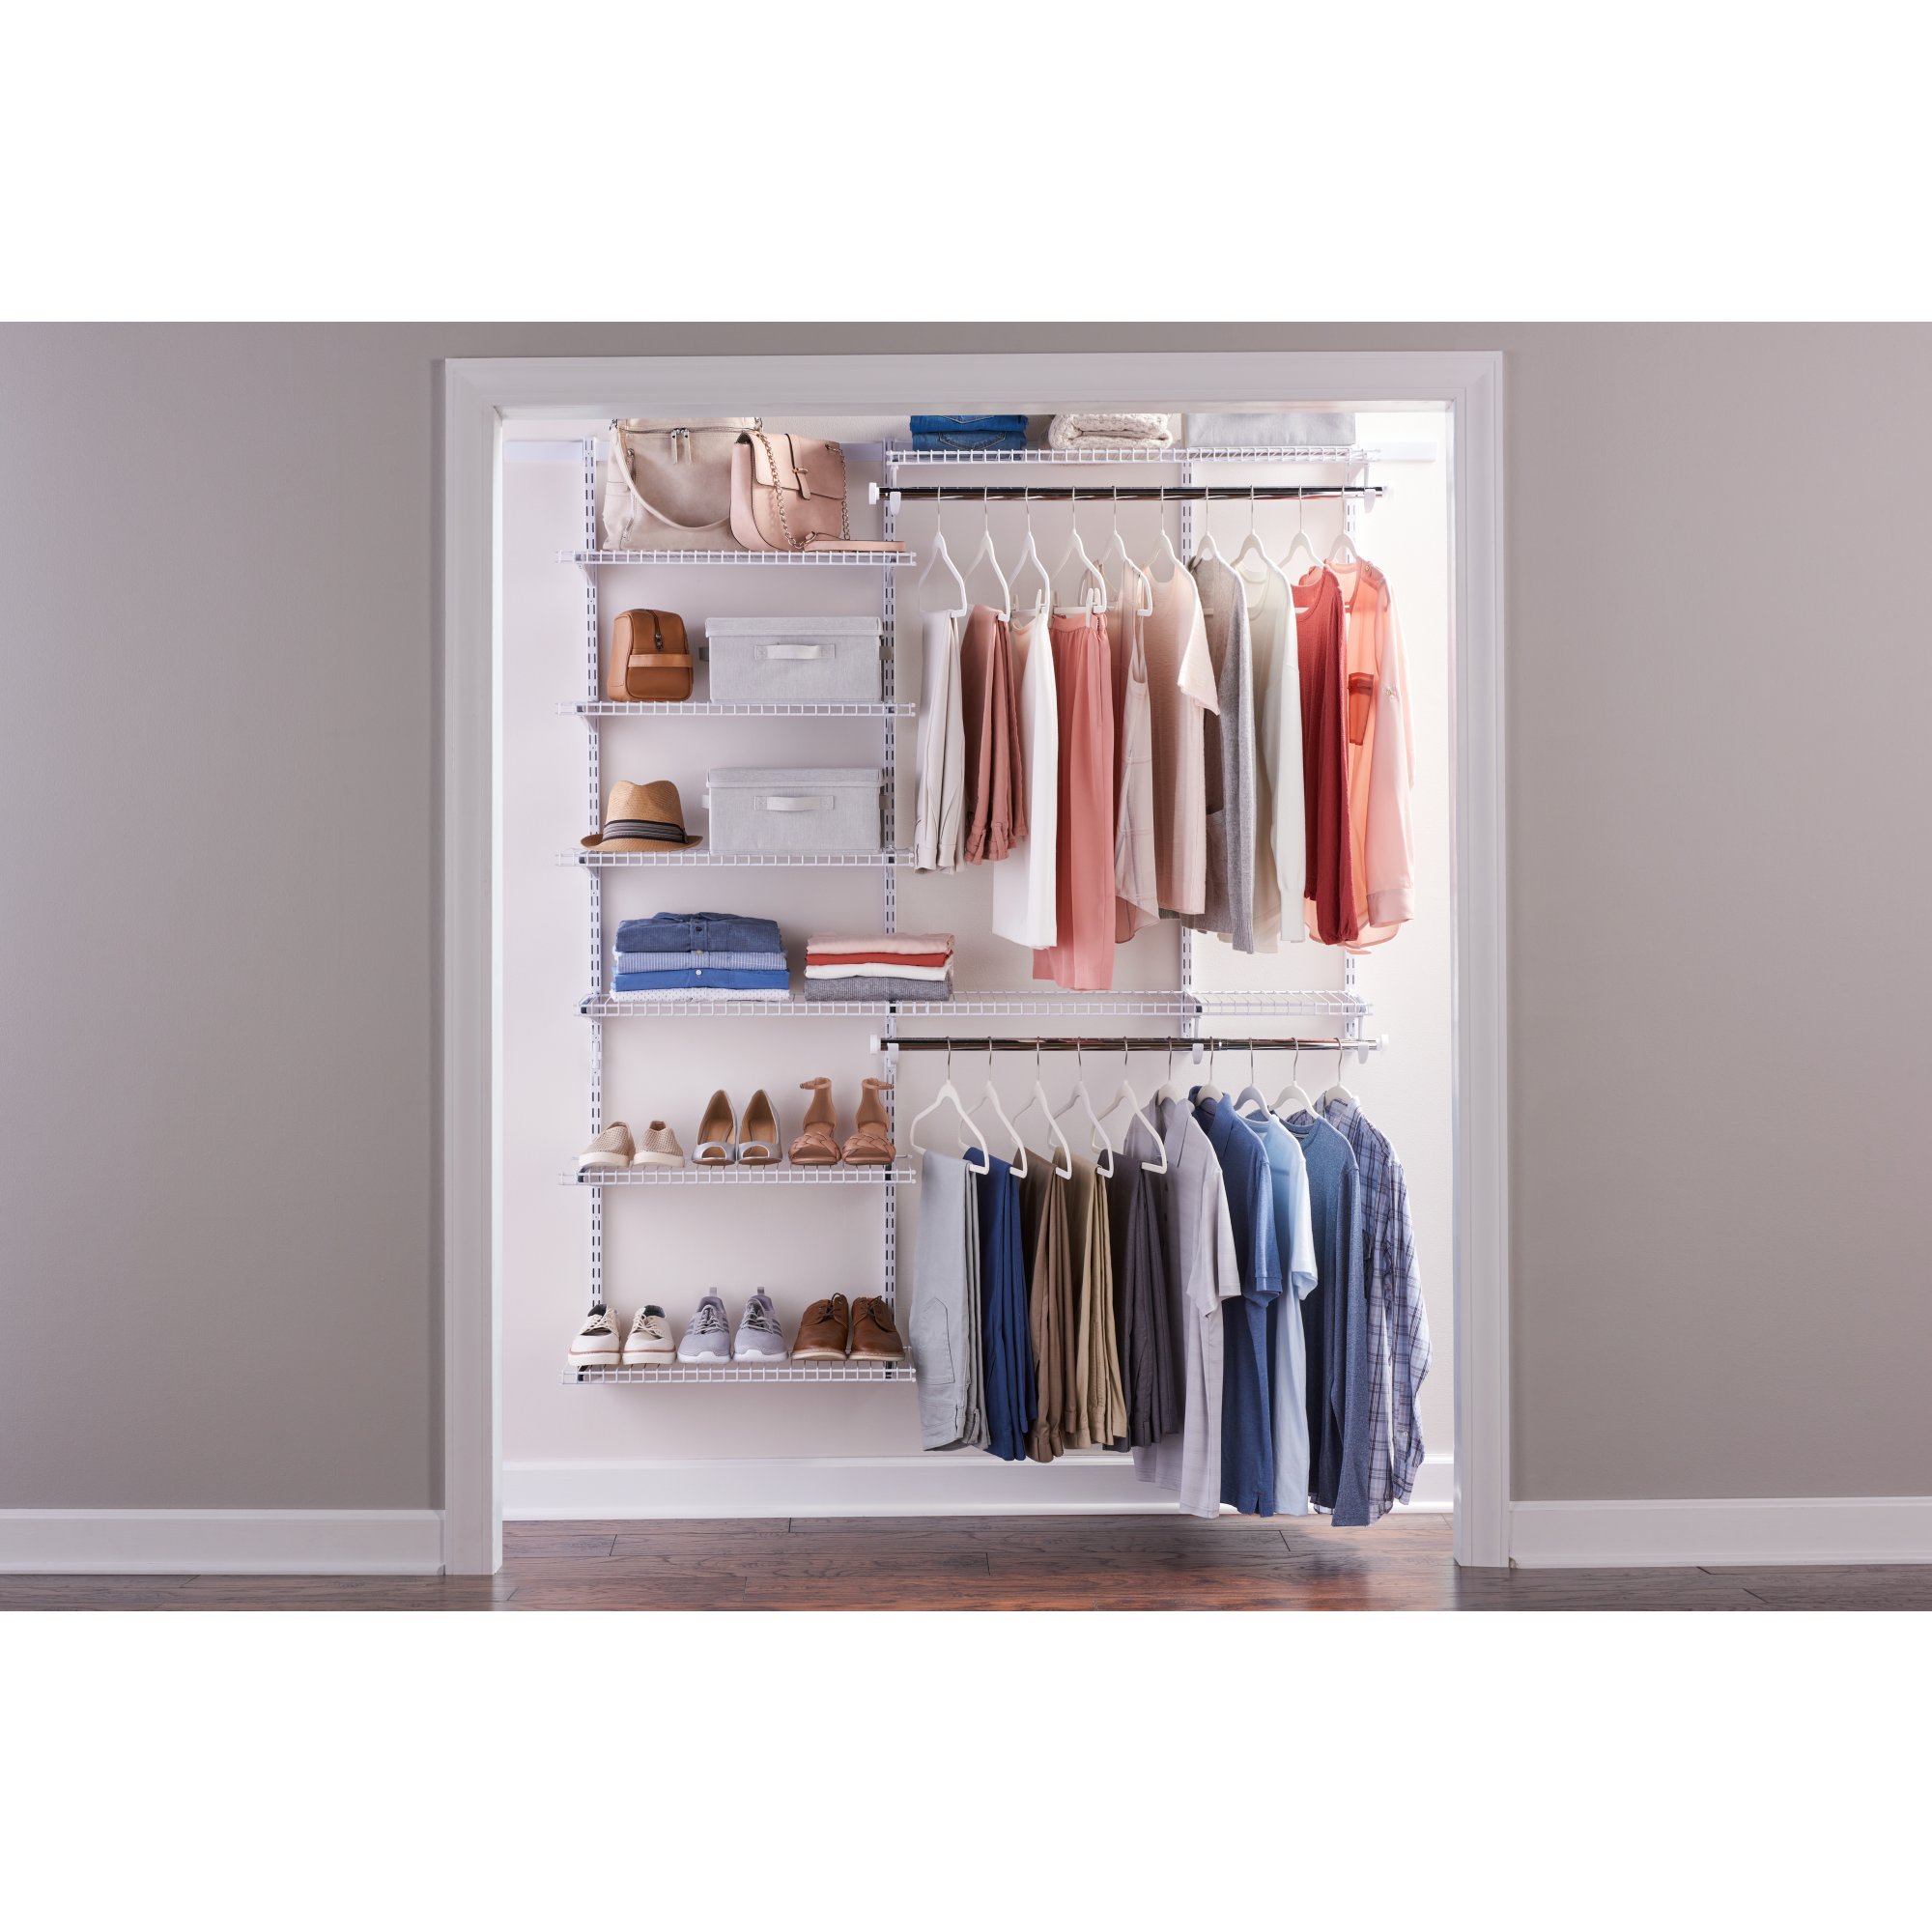 Rubbermaid FastTrack 3-ft to 6-ft x 12-in White Wire Closet Kit at